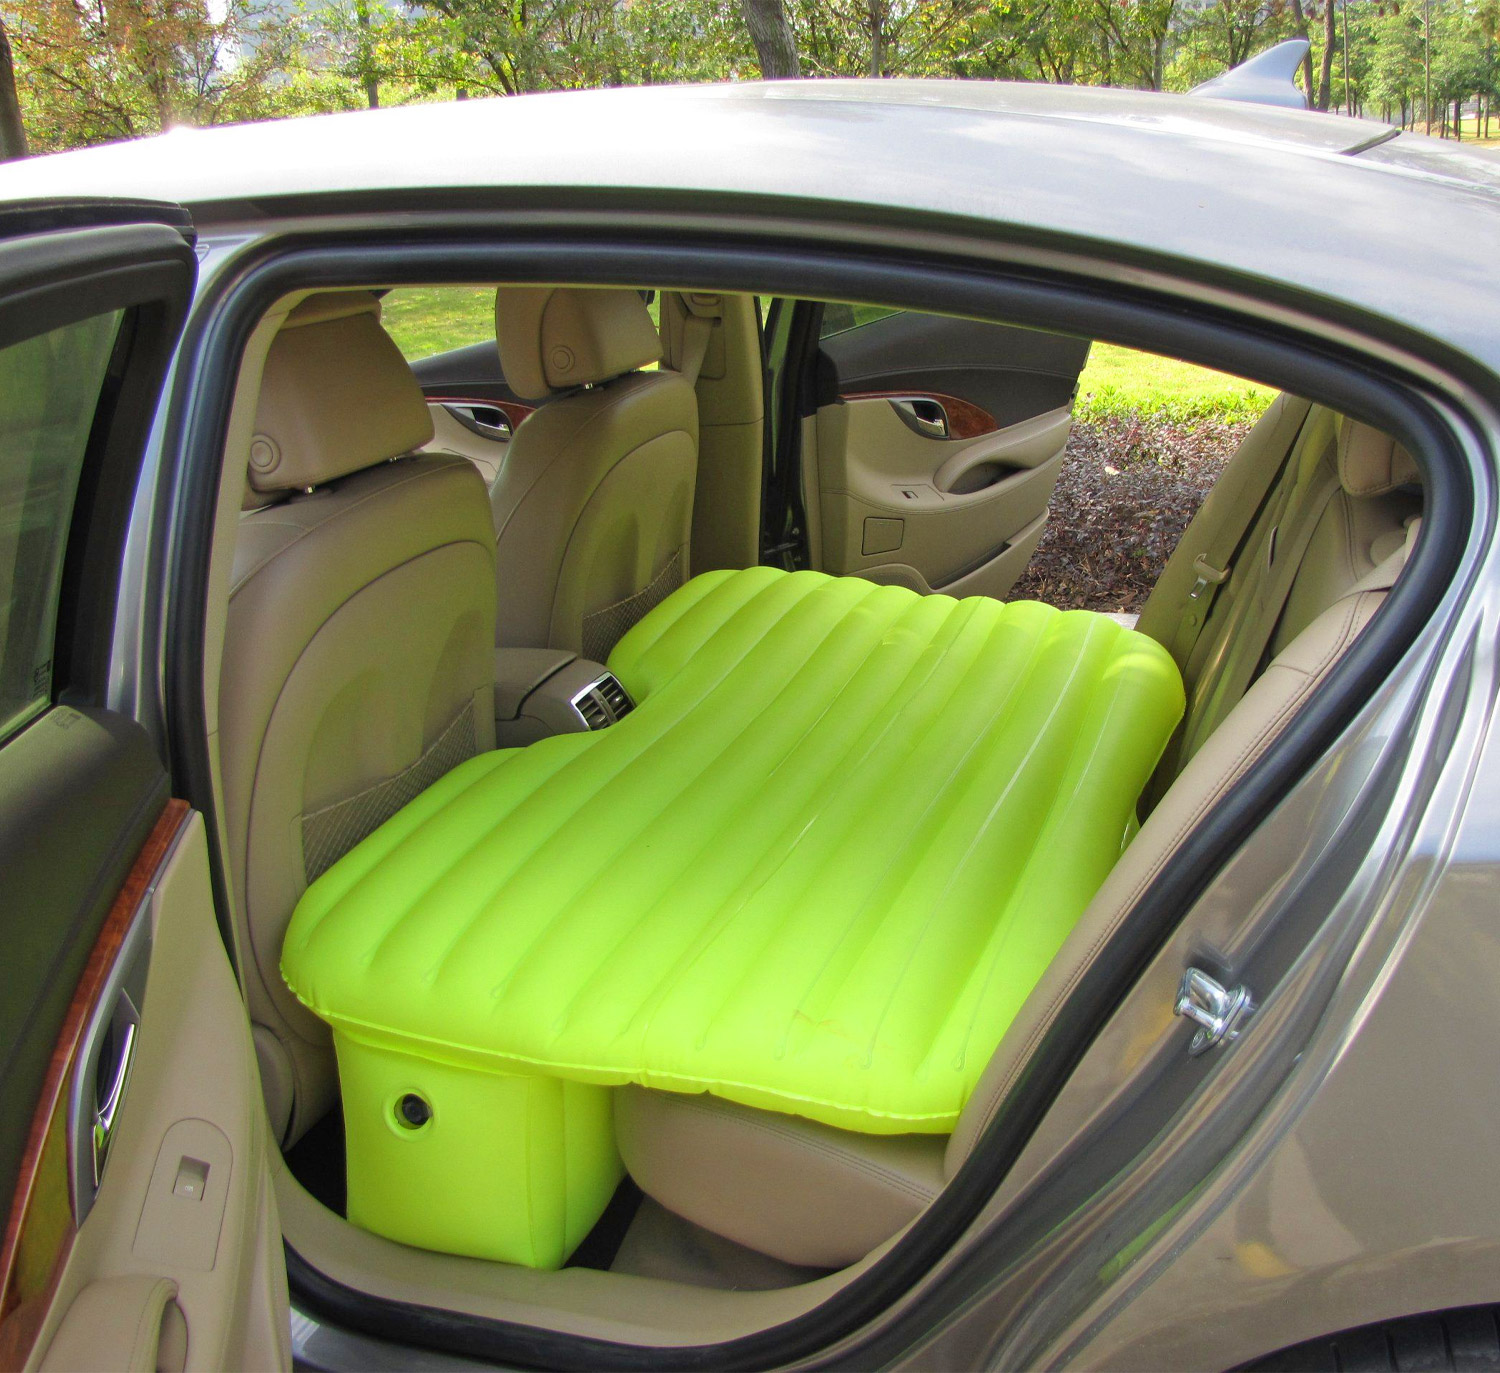 This Inflatable Backseat Car Bed Lets You Sleep Comfortably In Your Car While On The Go 0 